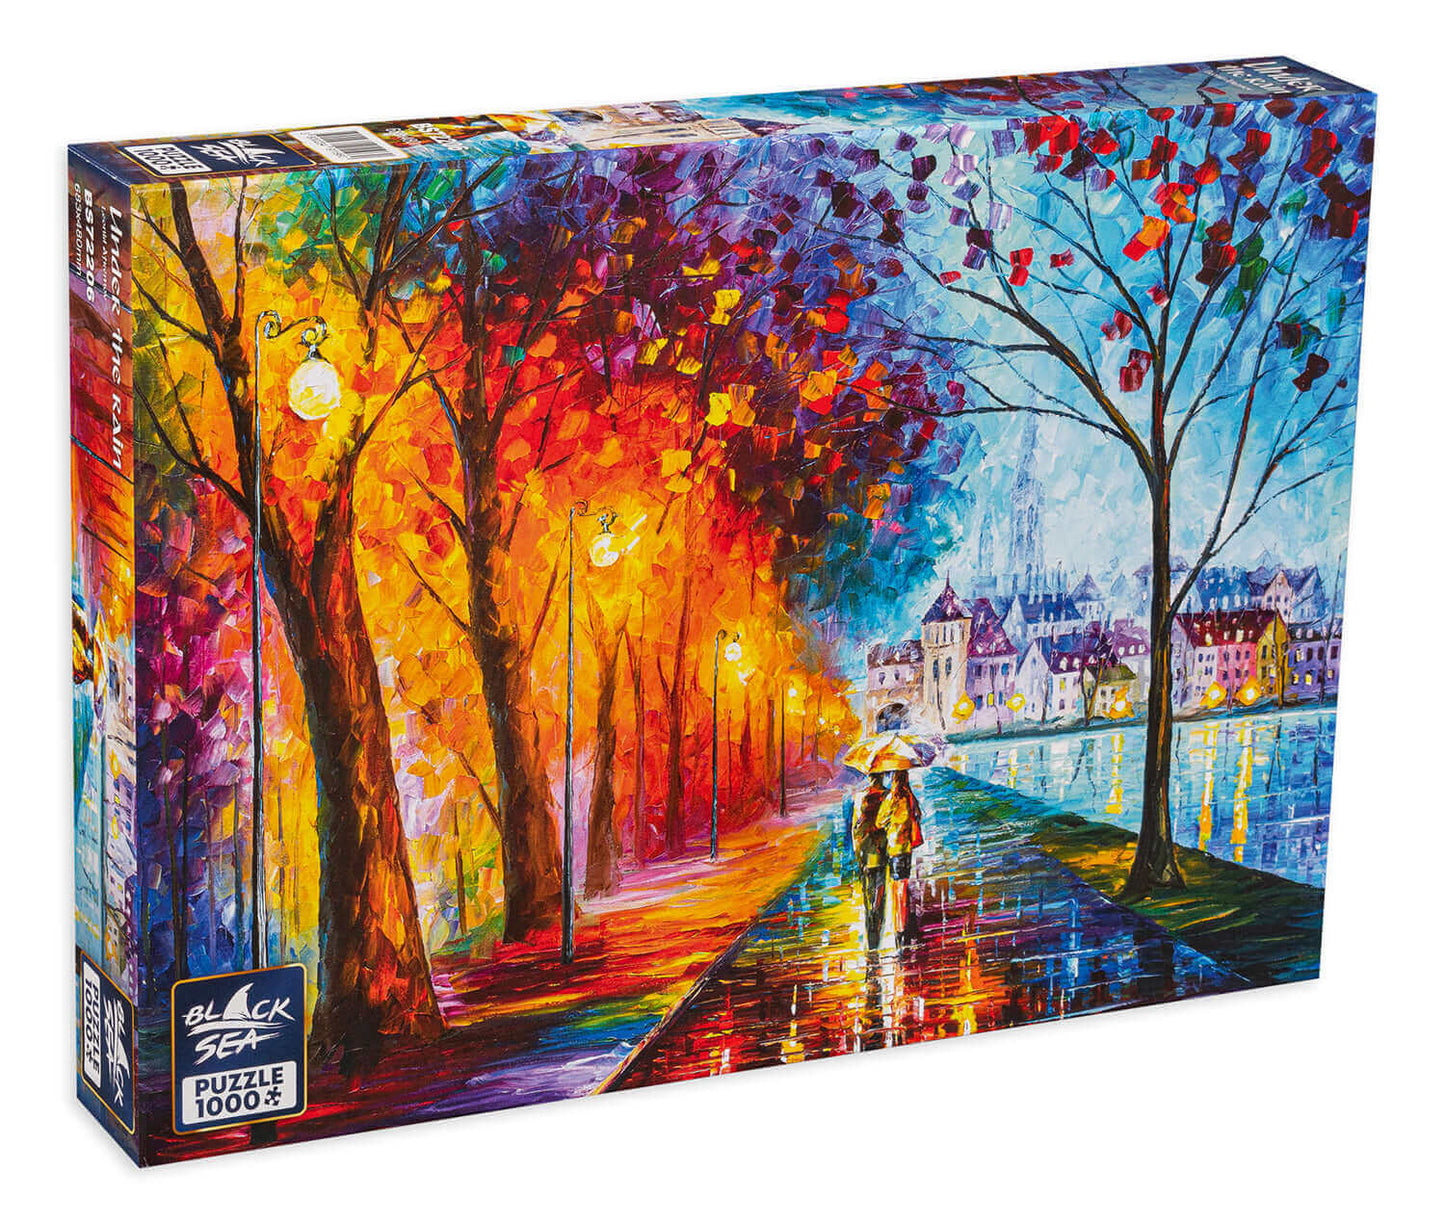 Puzzle Black Sea Premium 1000 pieces - Under the Rain, Leonid Afremov represents autumn as never before. It is colourful and warm, and the whole world is reflected in the streets, washed by the warm rain. Afremov’s unique style using a palette knife with